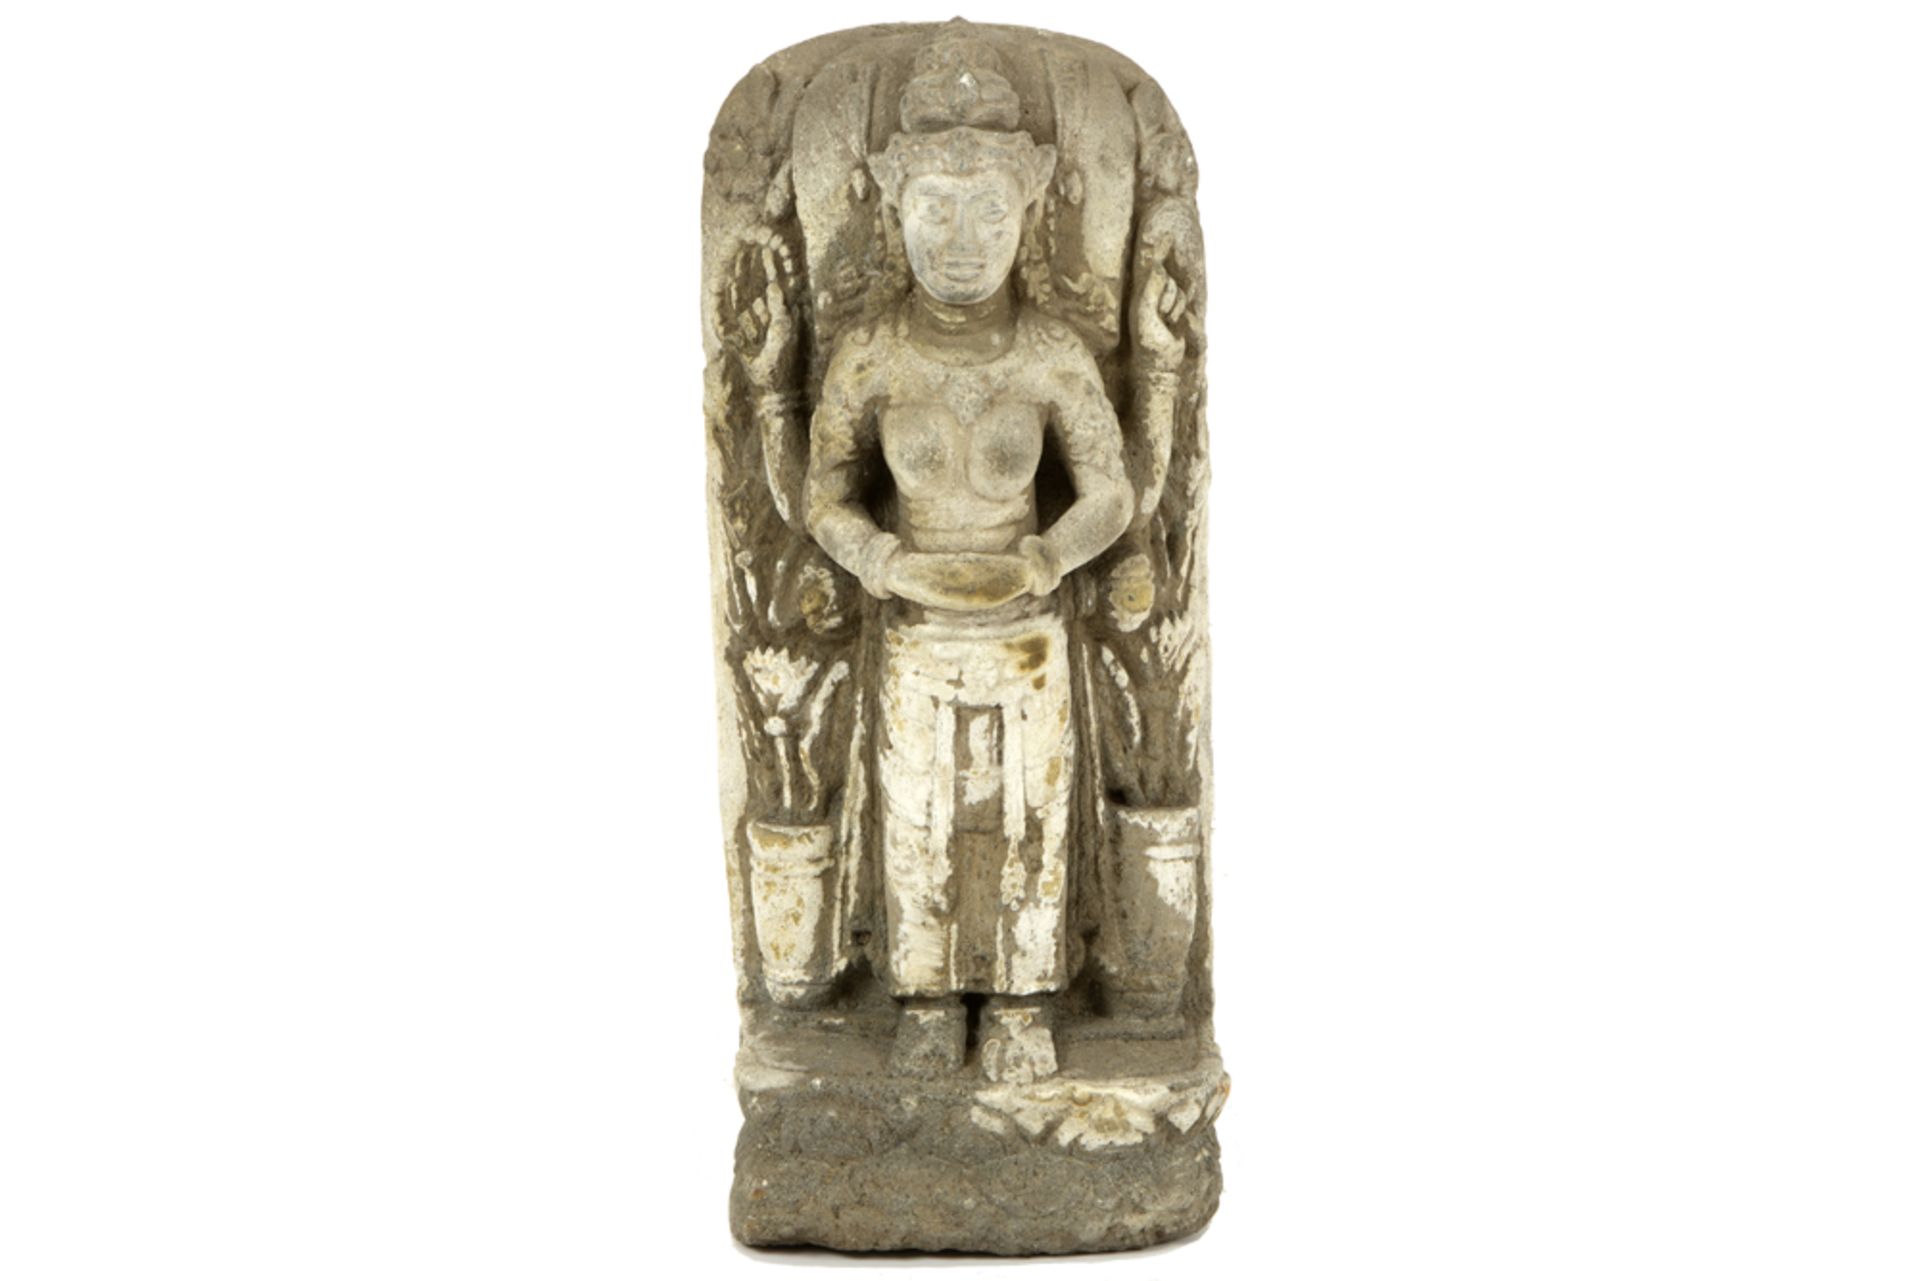 presumably 16th/17th Cent. Indian stone "Four armed female deity" sculpture ||INDIA - alicht 16°/17°